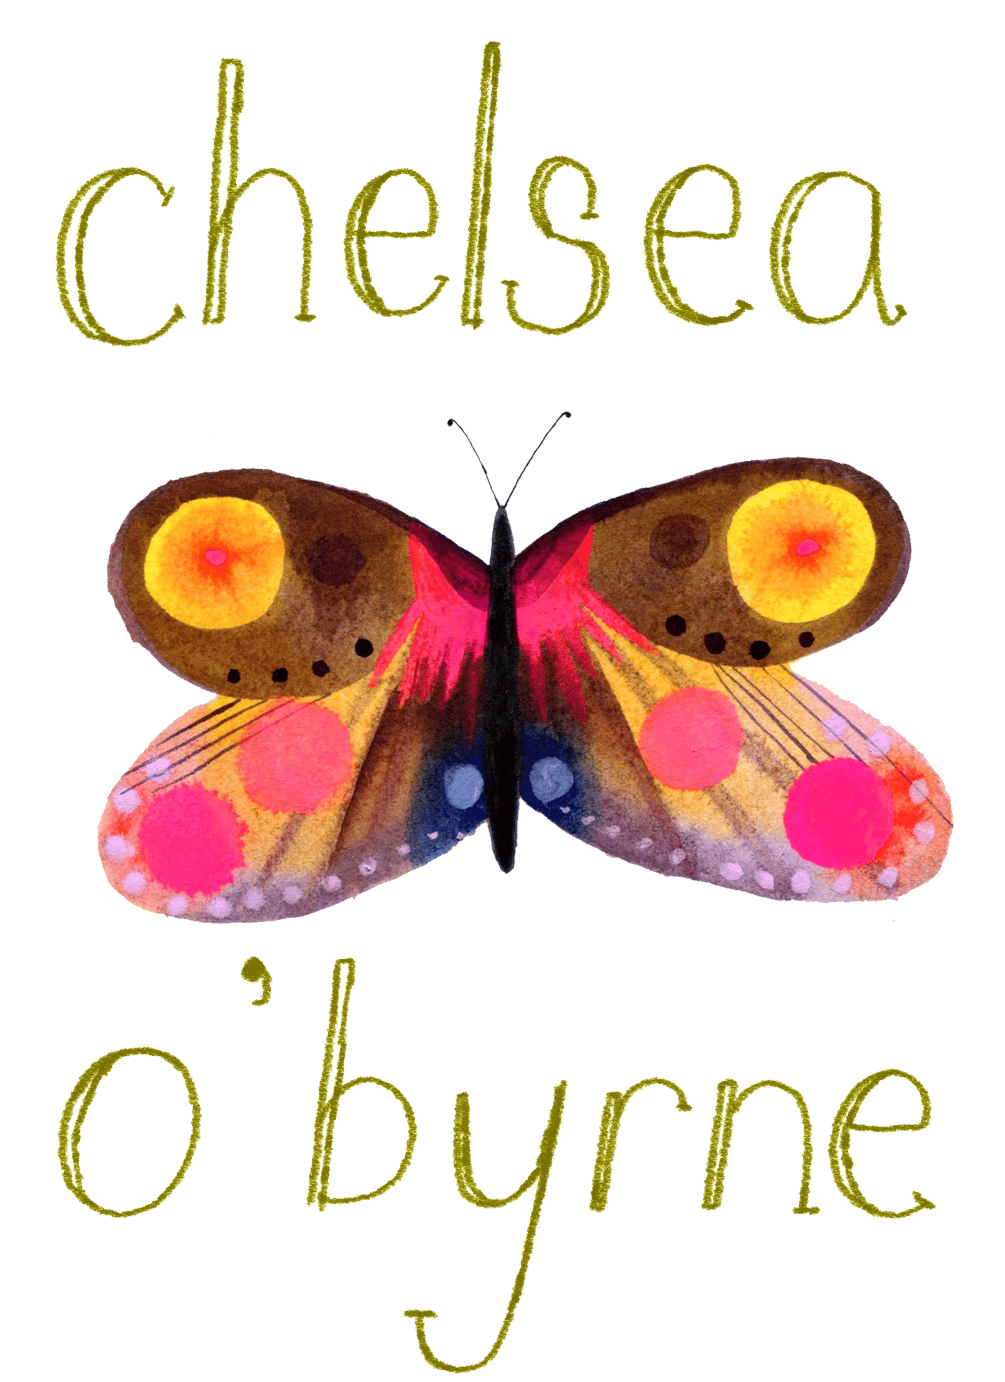 chelseaobyrne Home